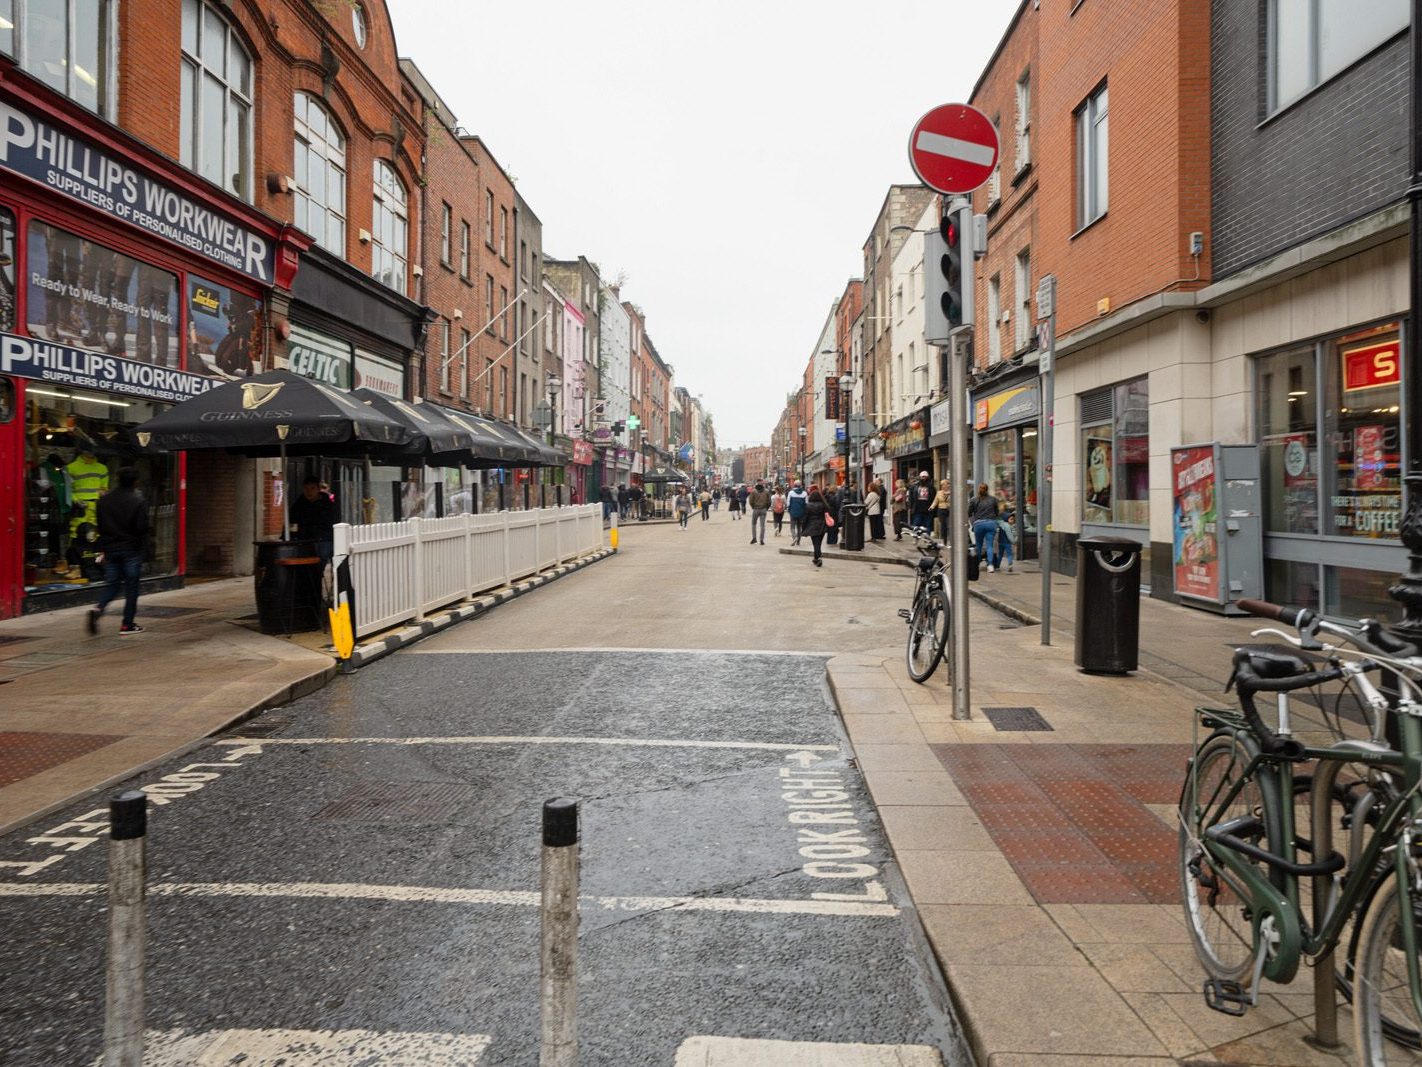 CAPEL STREET ON A DULL WET DAY [INTERIM CAPEL STREET IMPROVEMENT WORKS ARE NOW ONGOING] 024